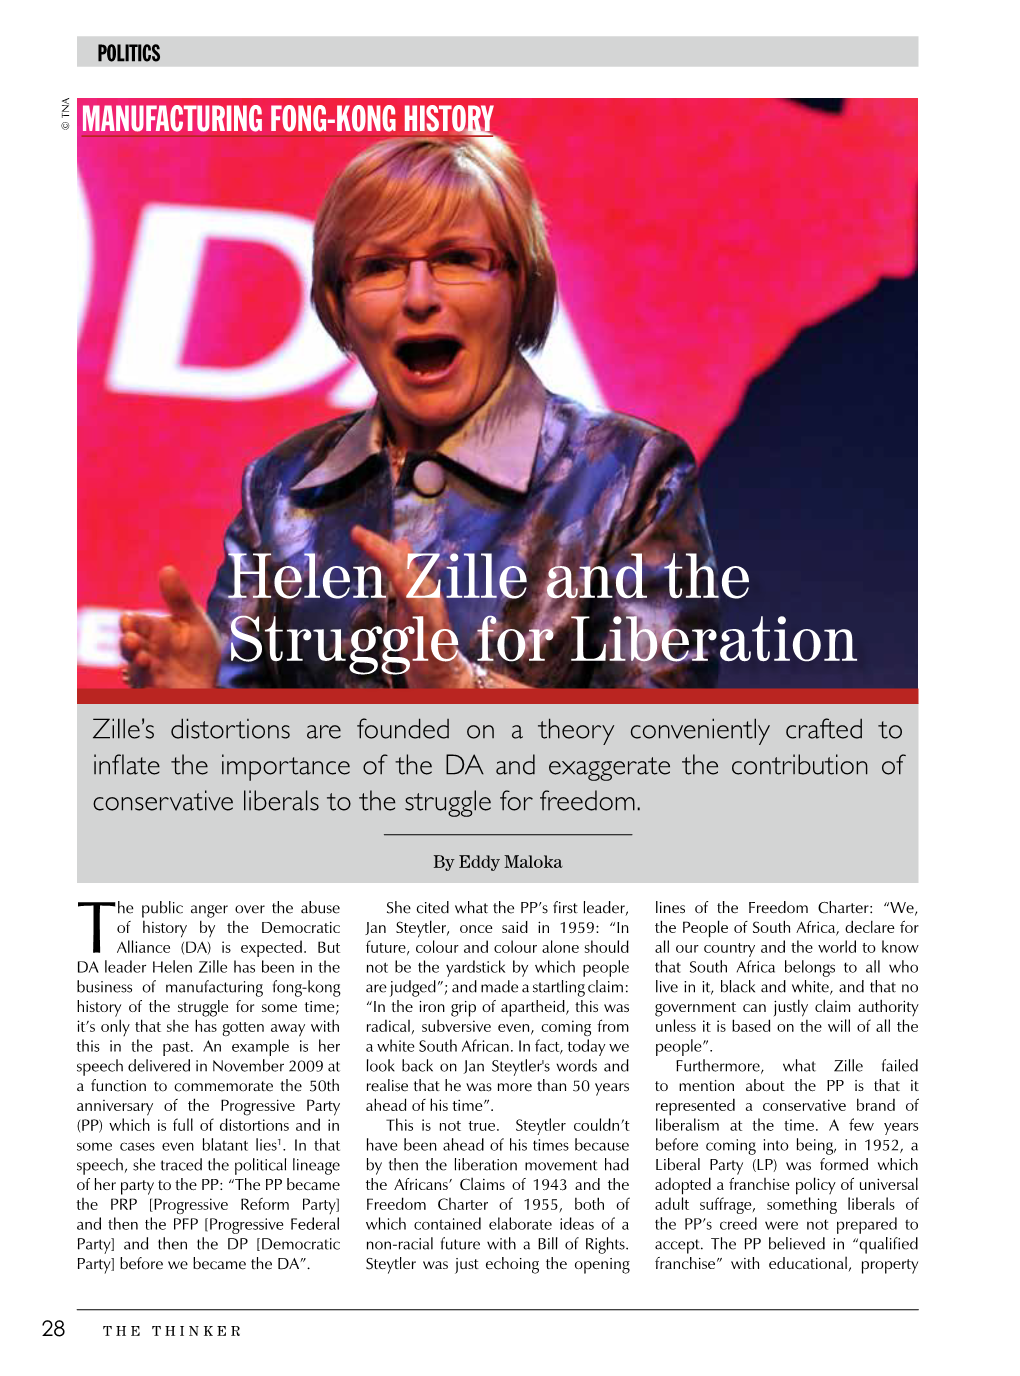 Helen Zille and the Struggle for Liberation